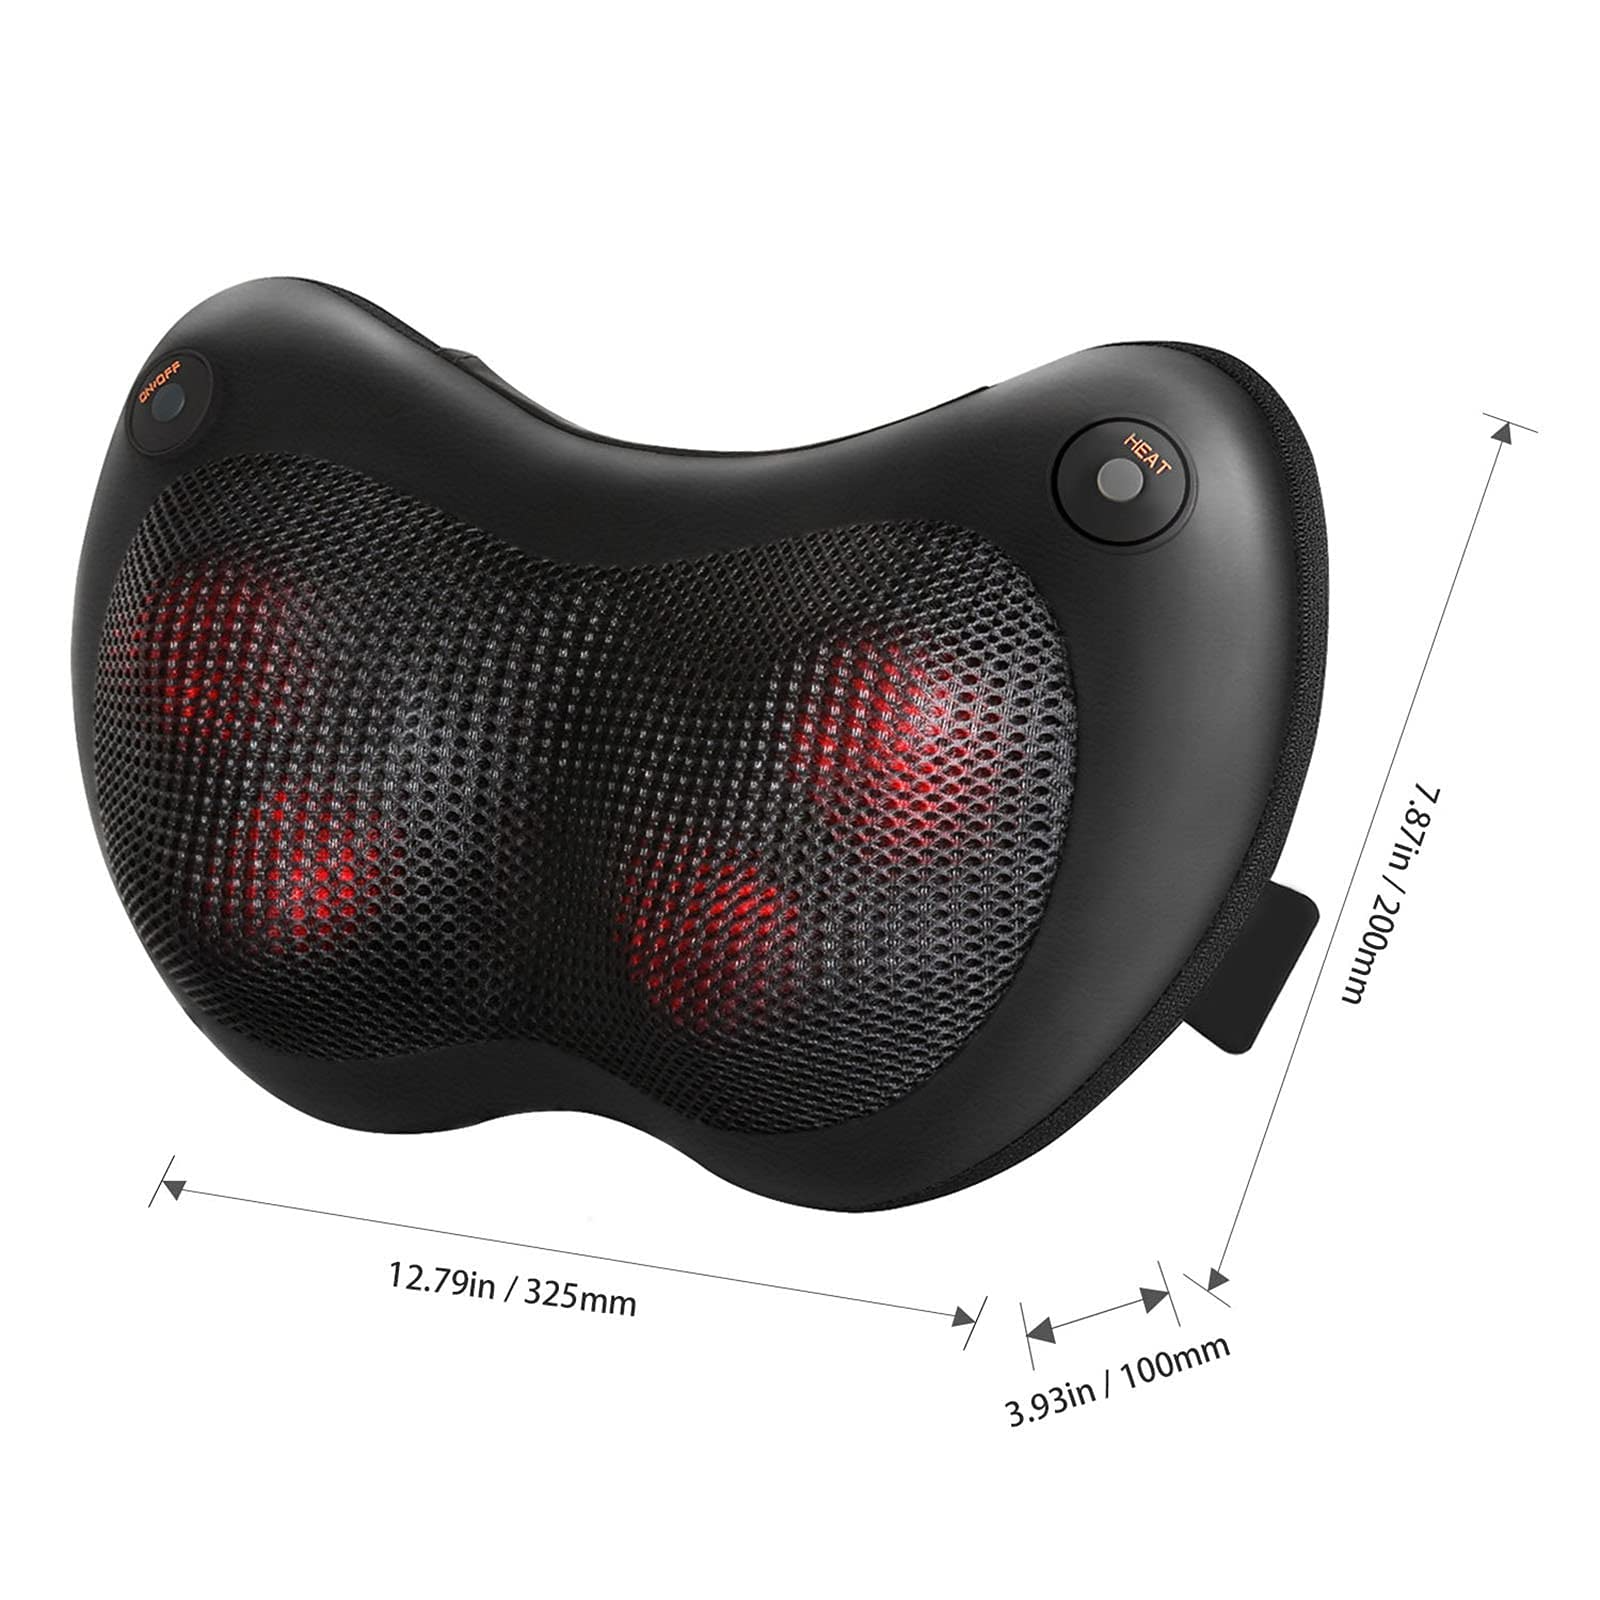 Dropship Shiatsu Pillow Massager With Heat Deep Kneading For Shoulder, Neck  And Back to Sell Online at a Lower Price